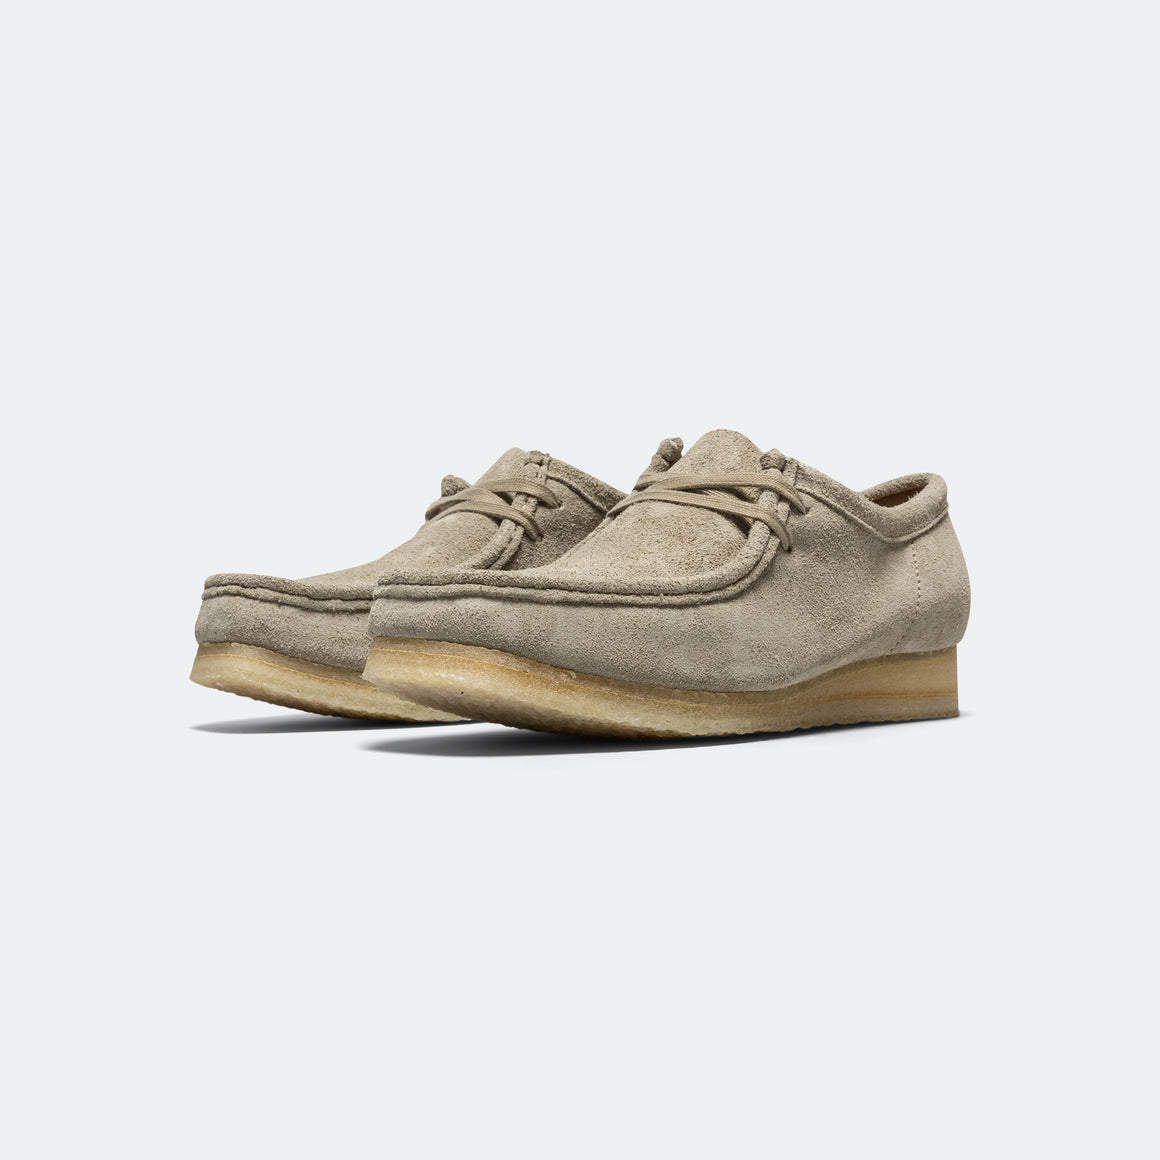 Clarks - Wallabee - Pale Grey Suede - UP THERE